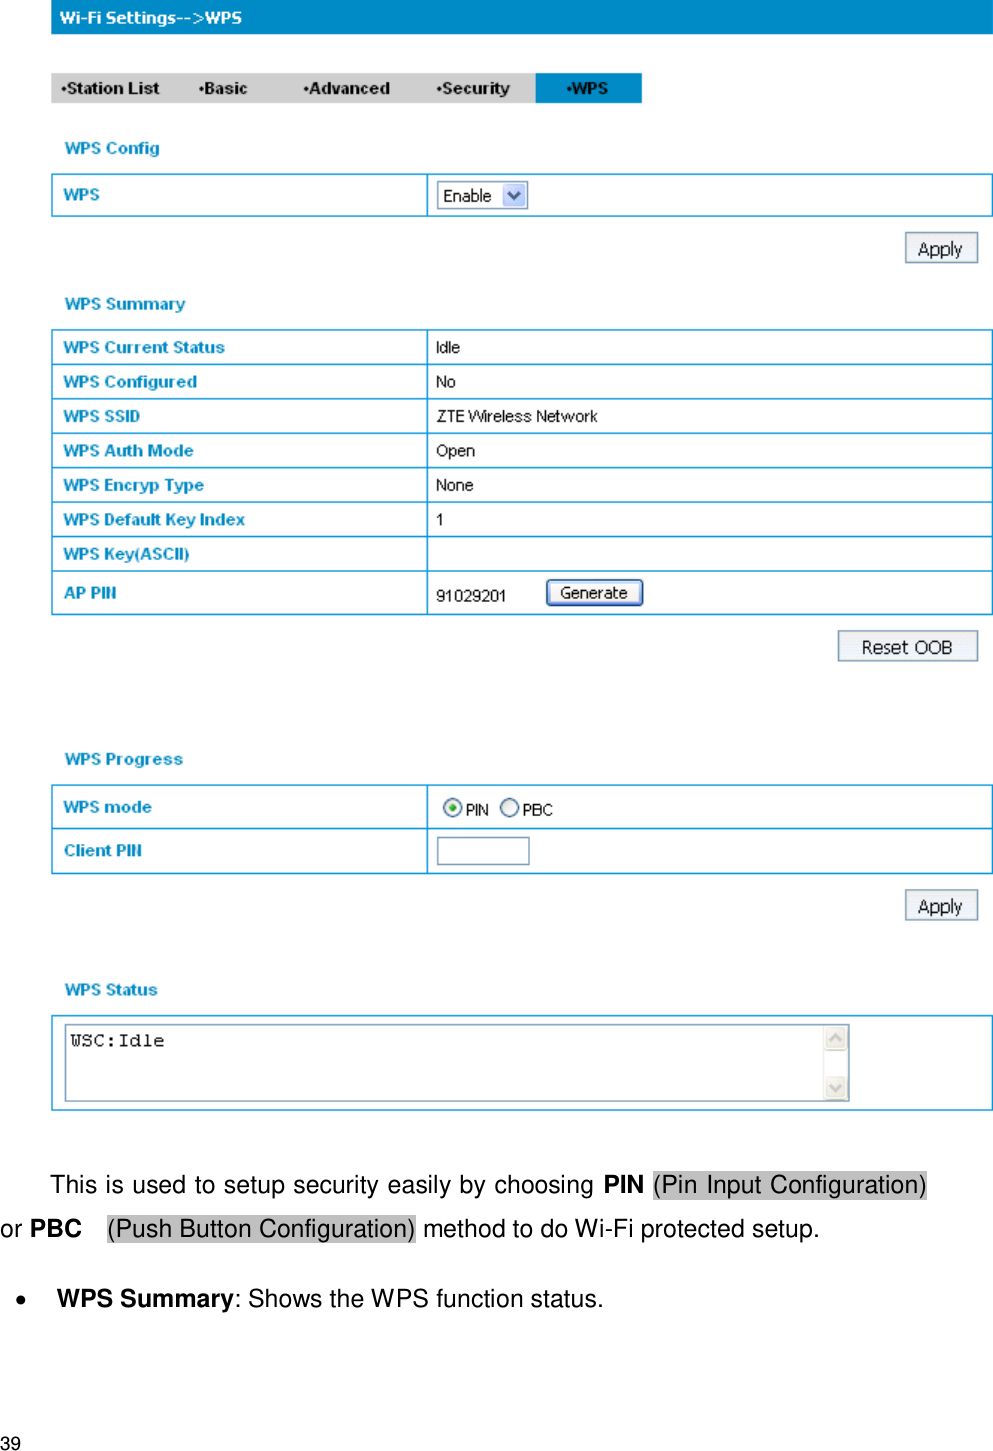 39  This is used to setup security easily by choosing PIN (Pin Input Configuration) or PBC    (Push Button Configuration) method to do Wi-Fi protected setup.  WPS Summary: Shows the WPS function status. 